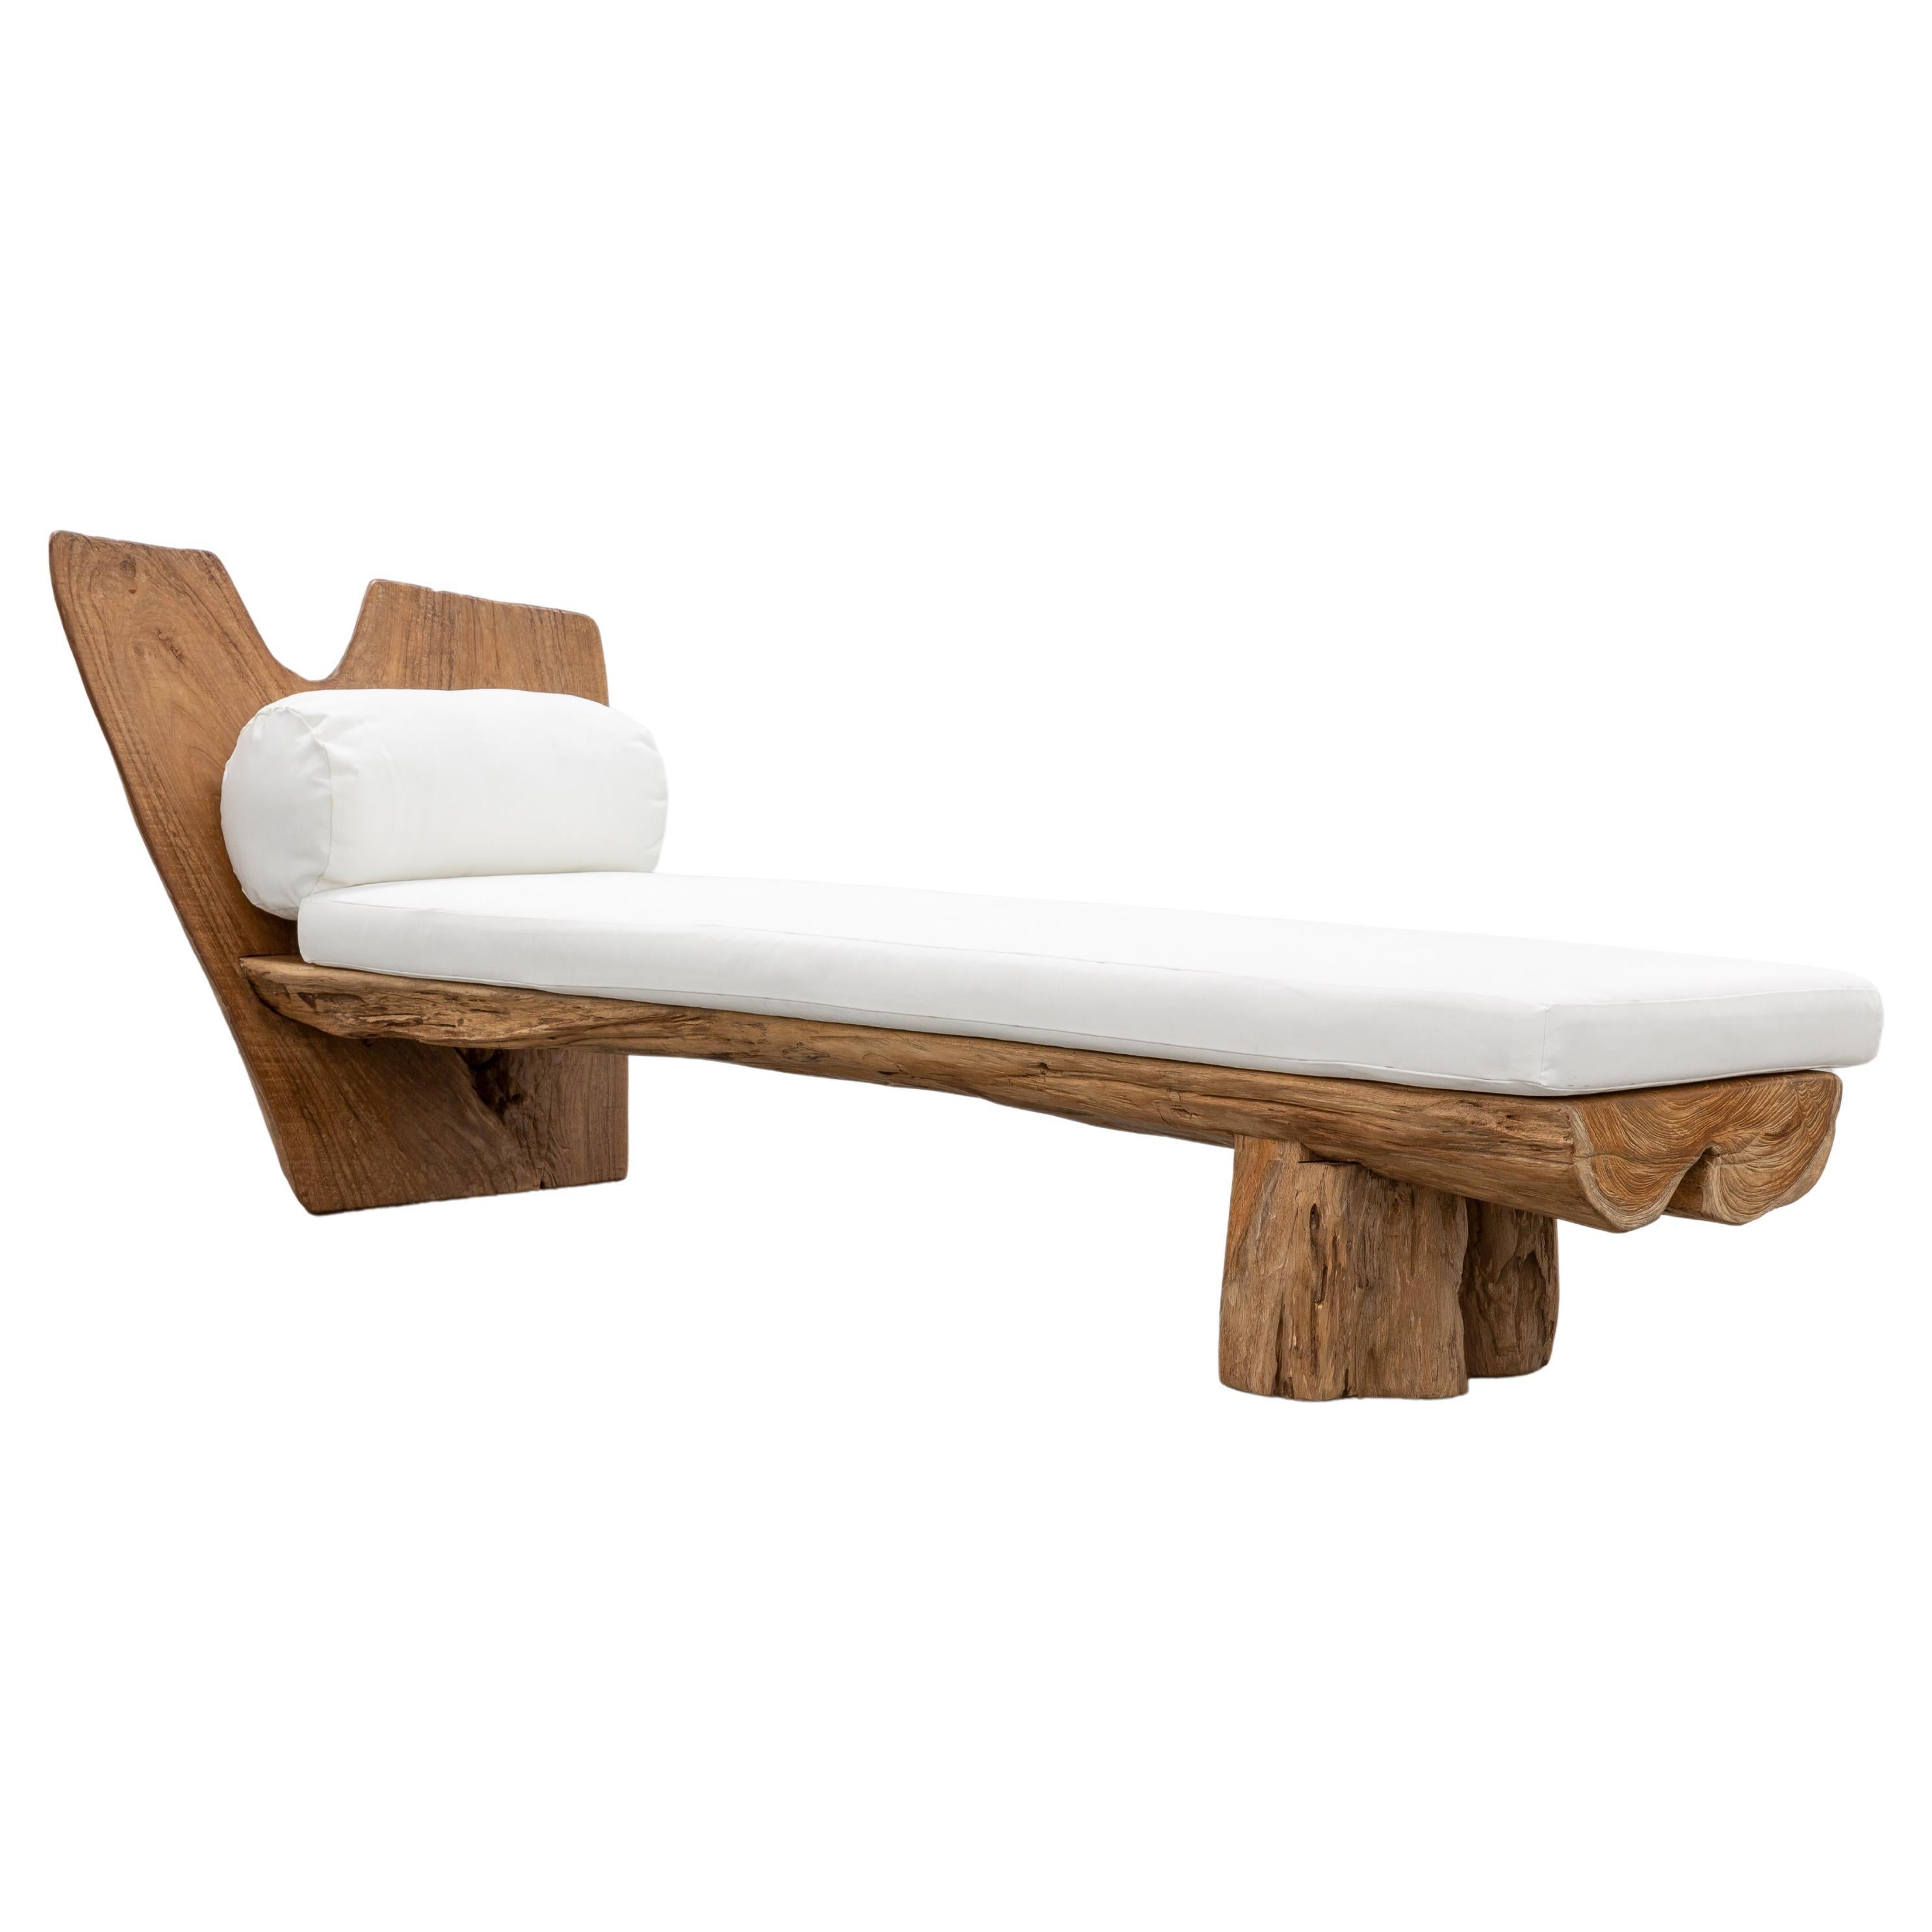 Lakkar Wood Chaise by CEU Studio, Represented by Tuleste Factory